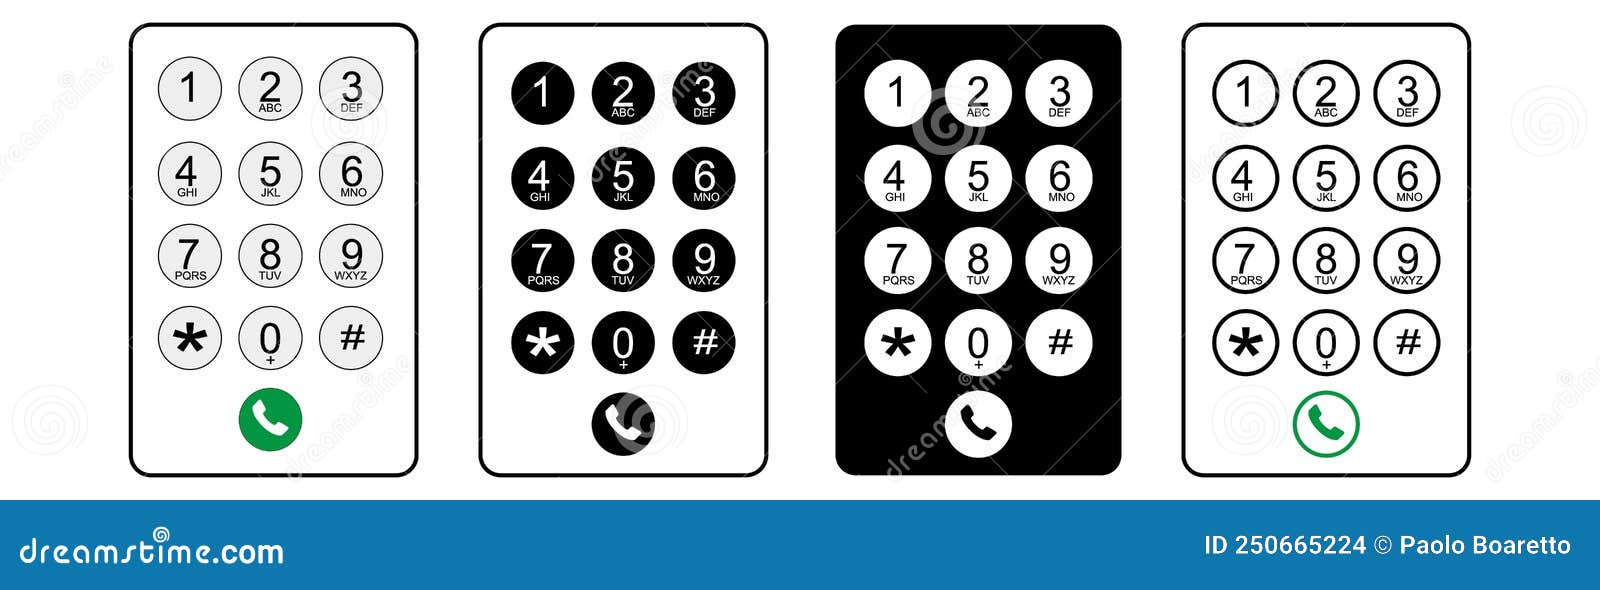 smartphone-user-keypad-with-numbers-and-letters-for-phone-keypad-on